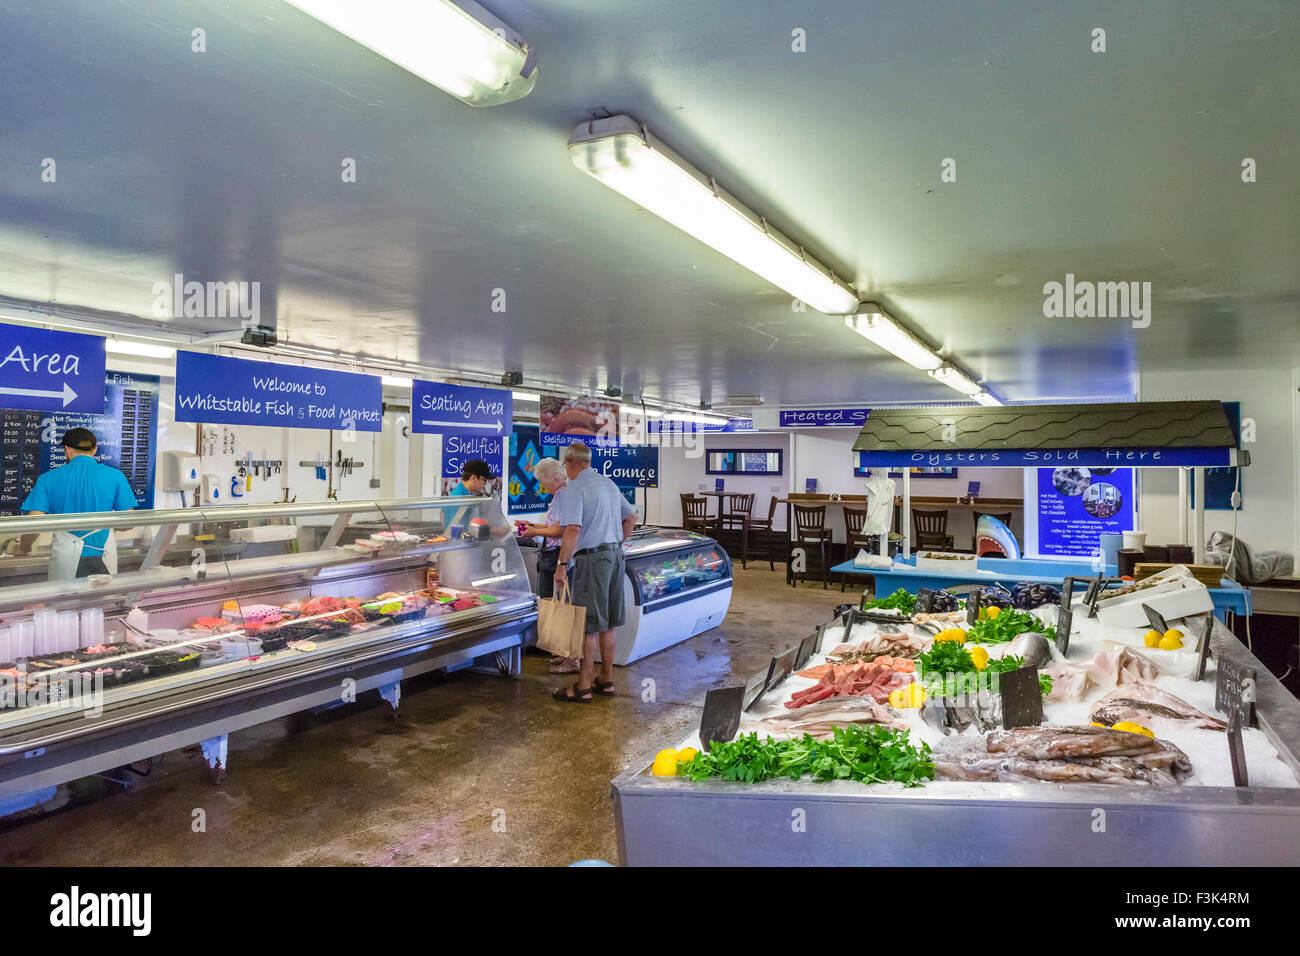 The Fish and Food Market by the harbour in Whitstable, Kent, England, UK Stock Photo